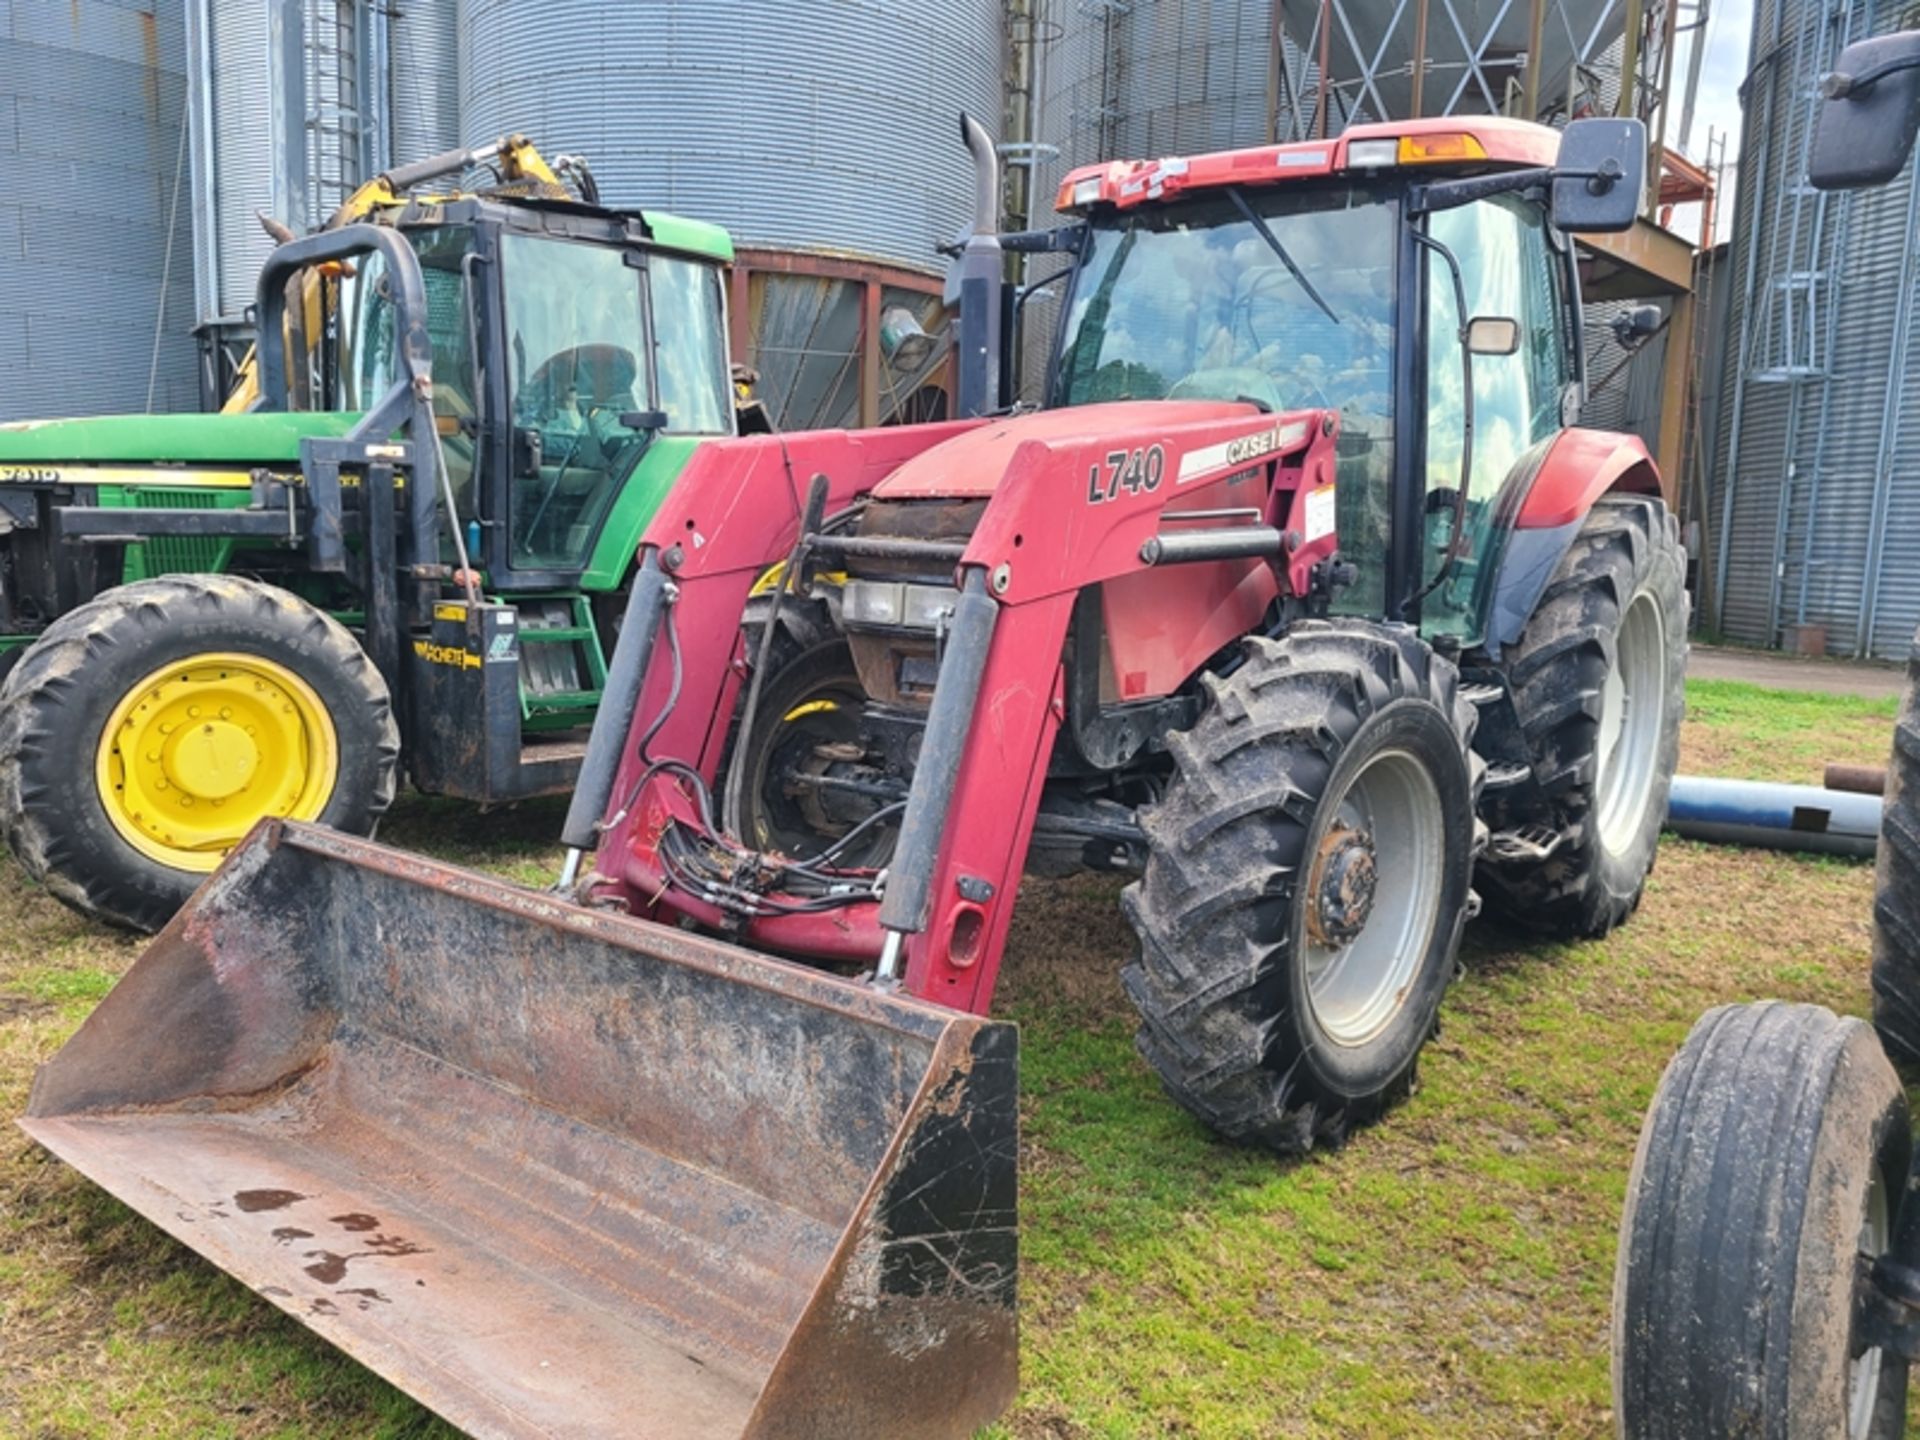 CASE 110 tractor with cab, 4wd, & L740 loader bucket - 7858 hrs Forward/reverse shuttle